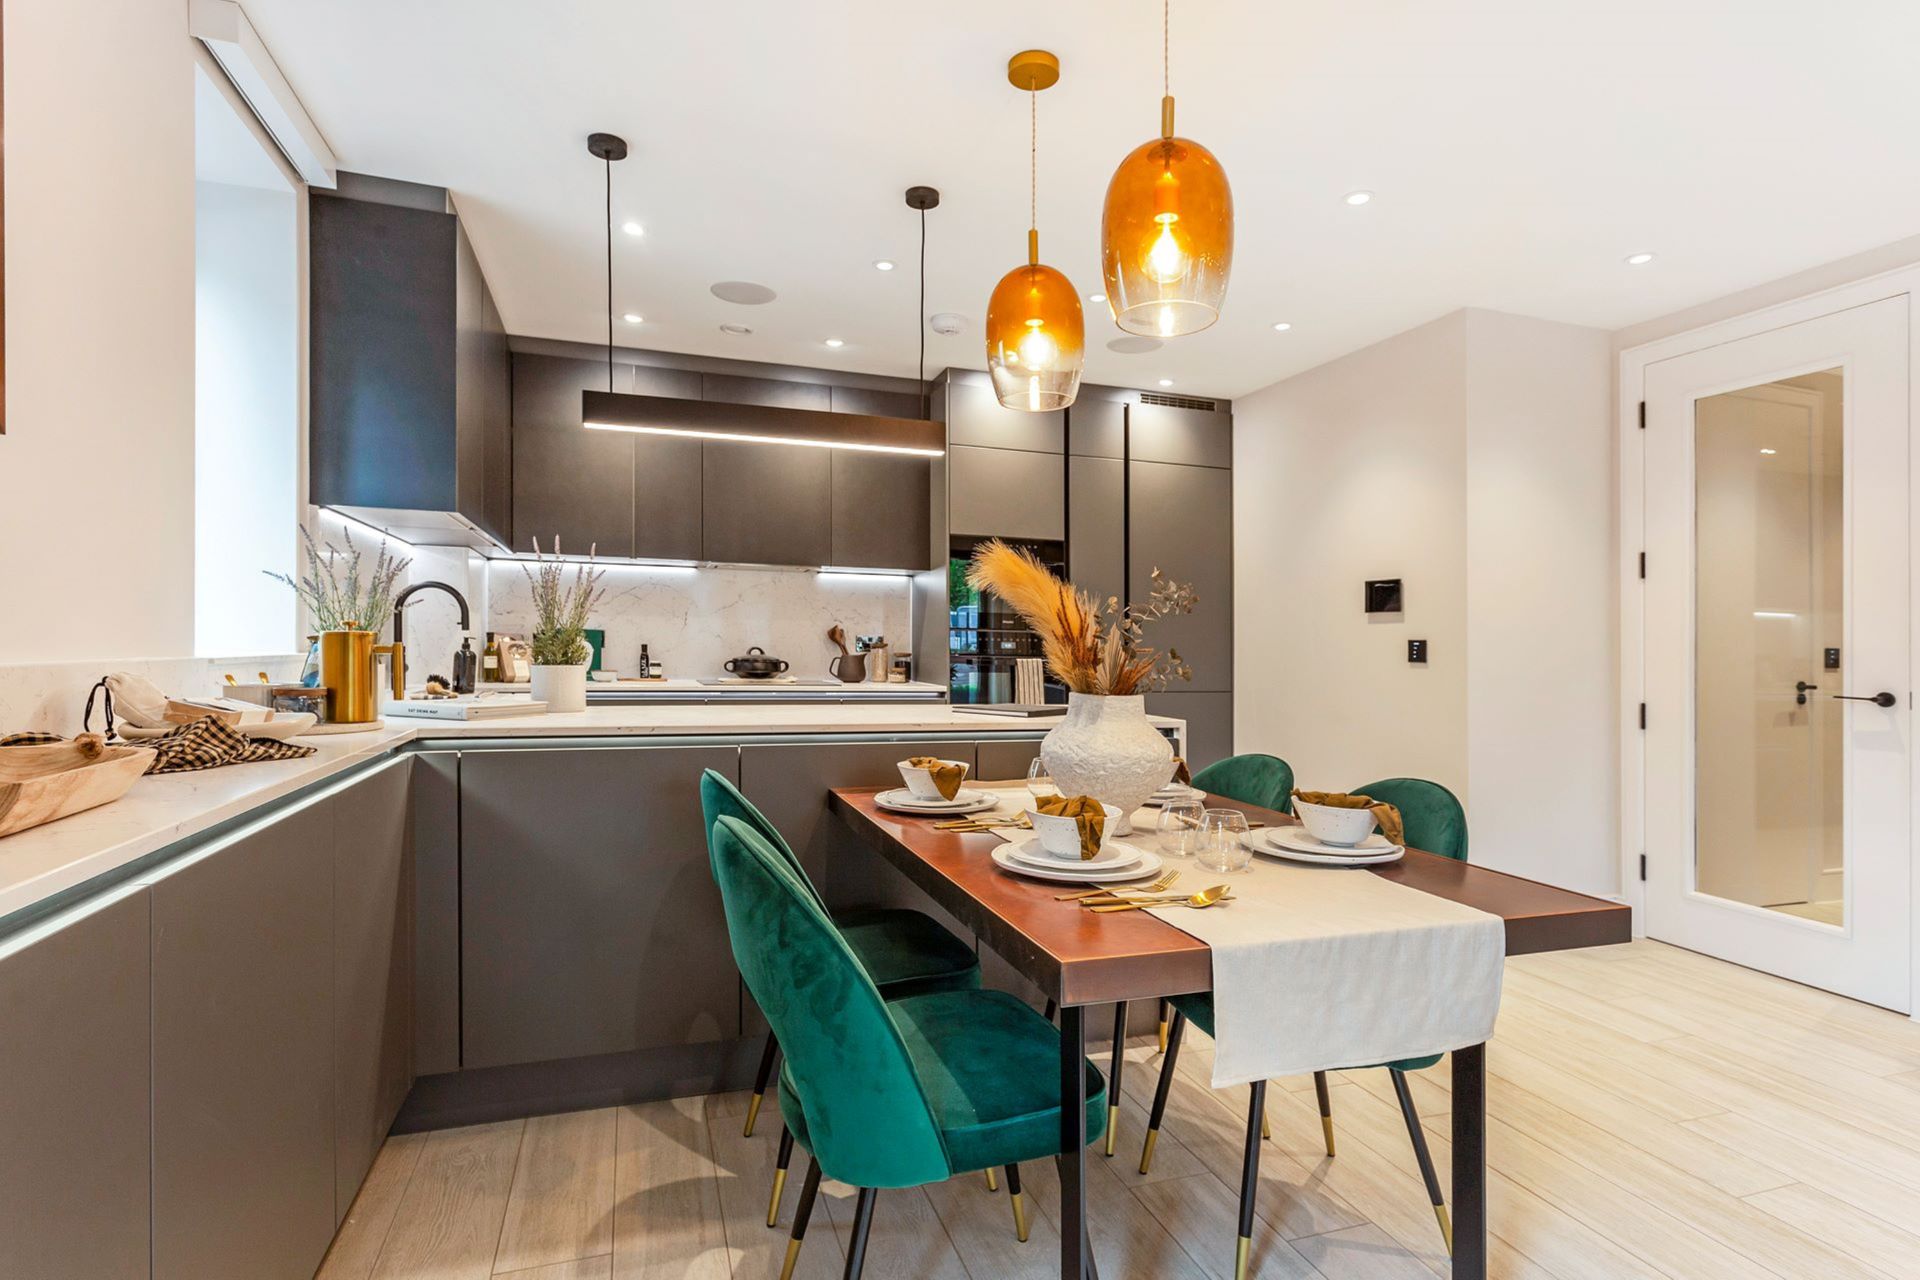 Show apartment with grey modern kitchen, white dining tale and green velvet chairs